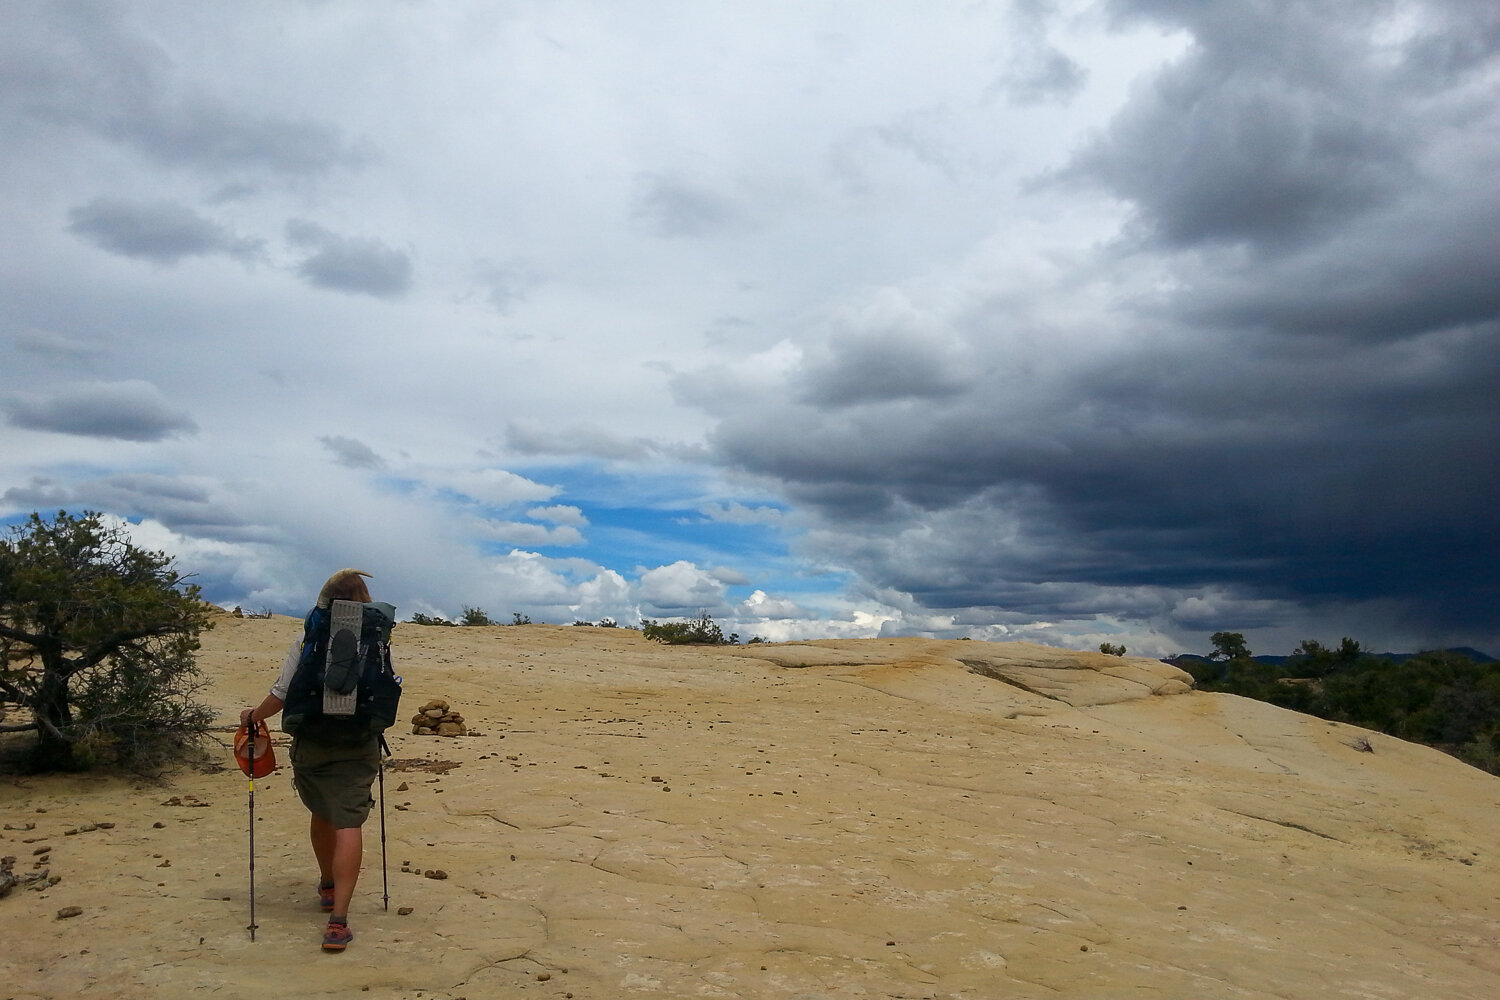 a backpacker in the desert with half of the sky clear and blue, half dark and stormy